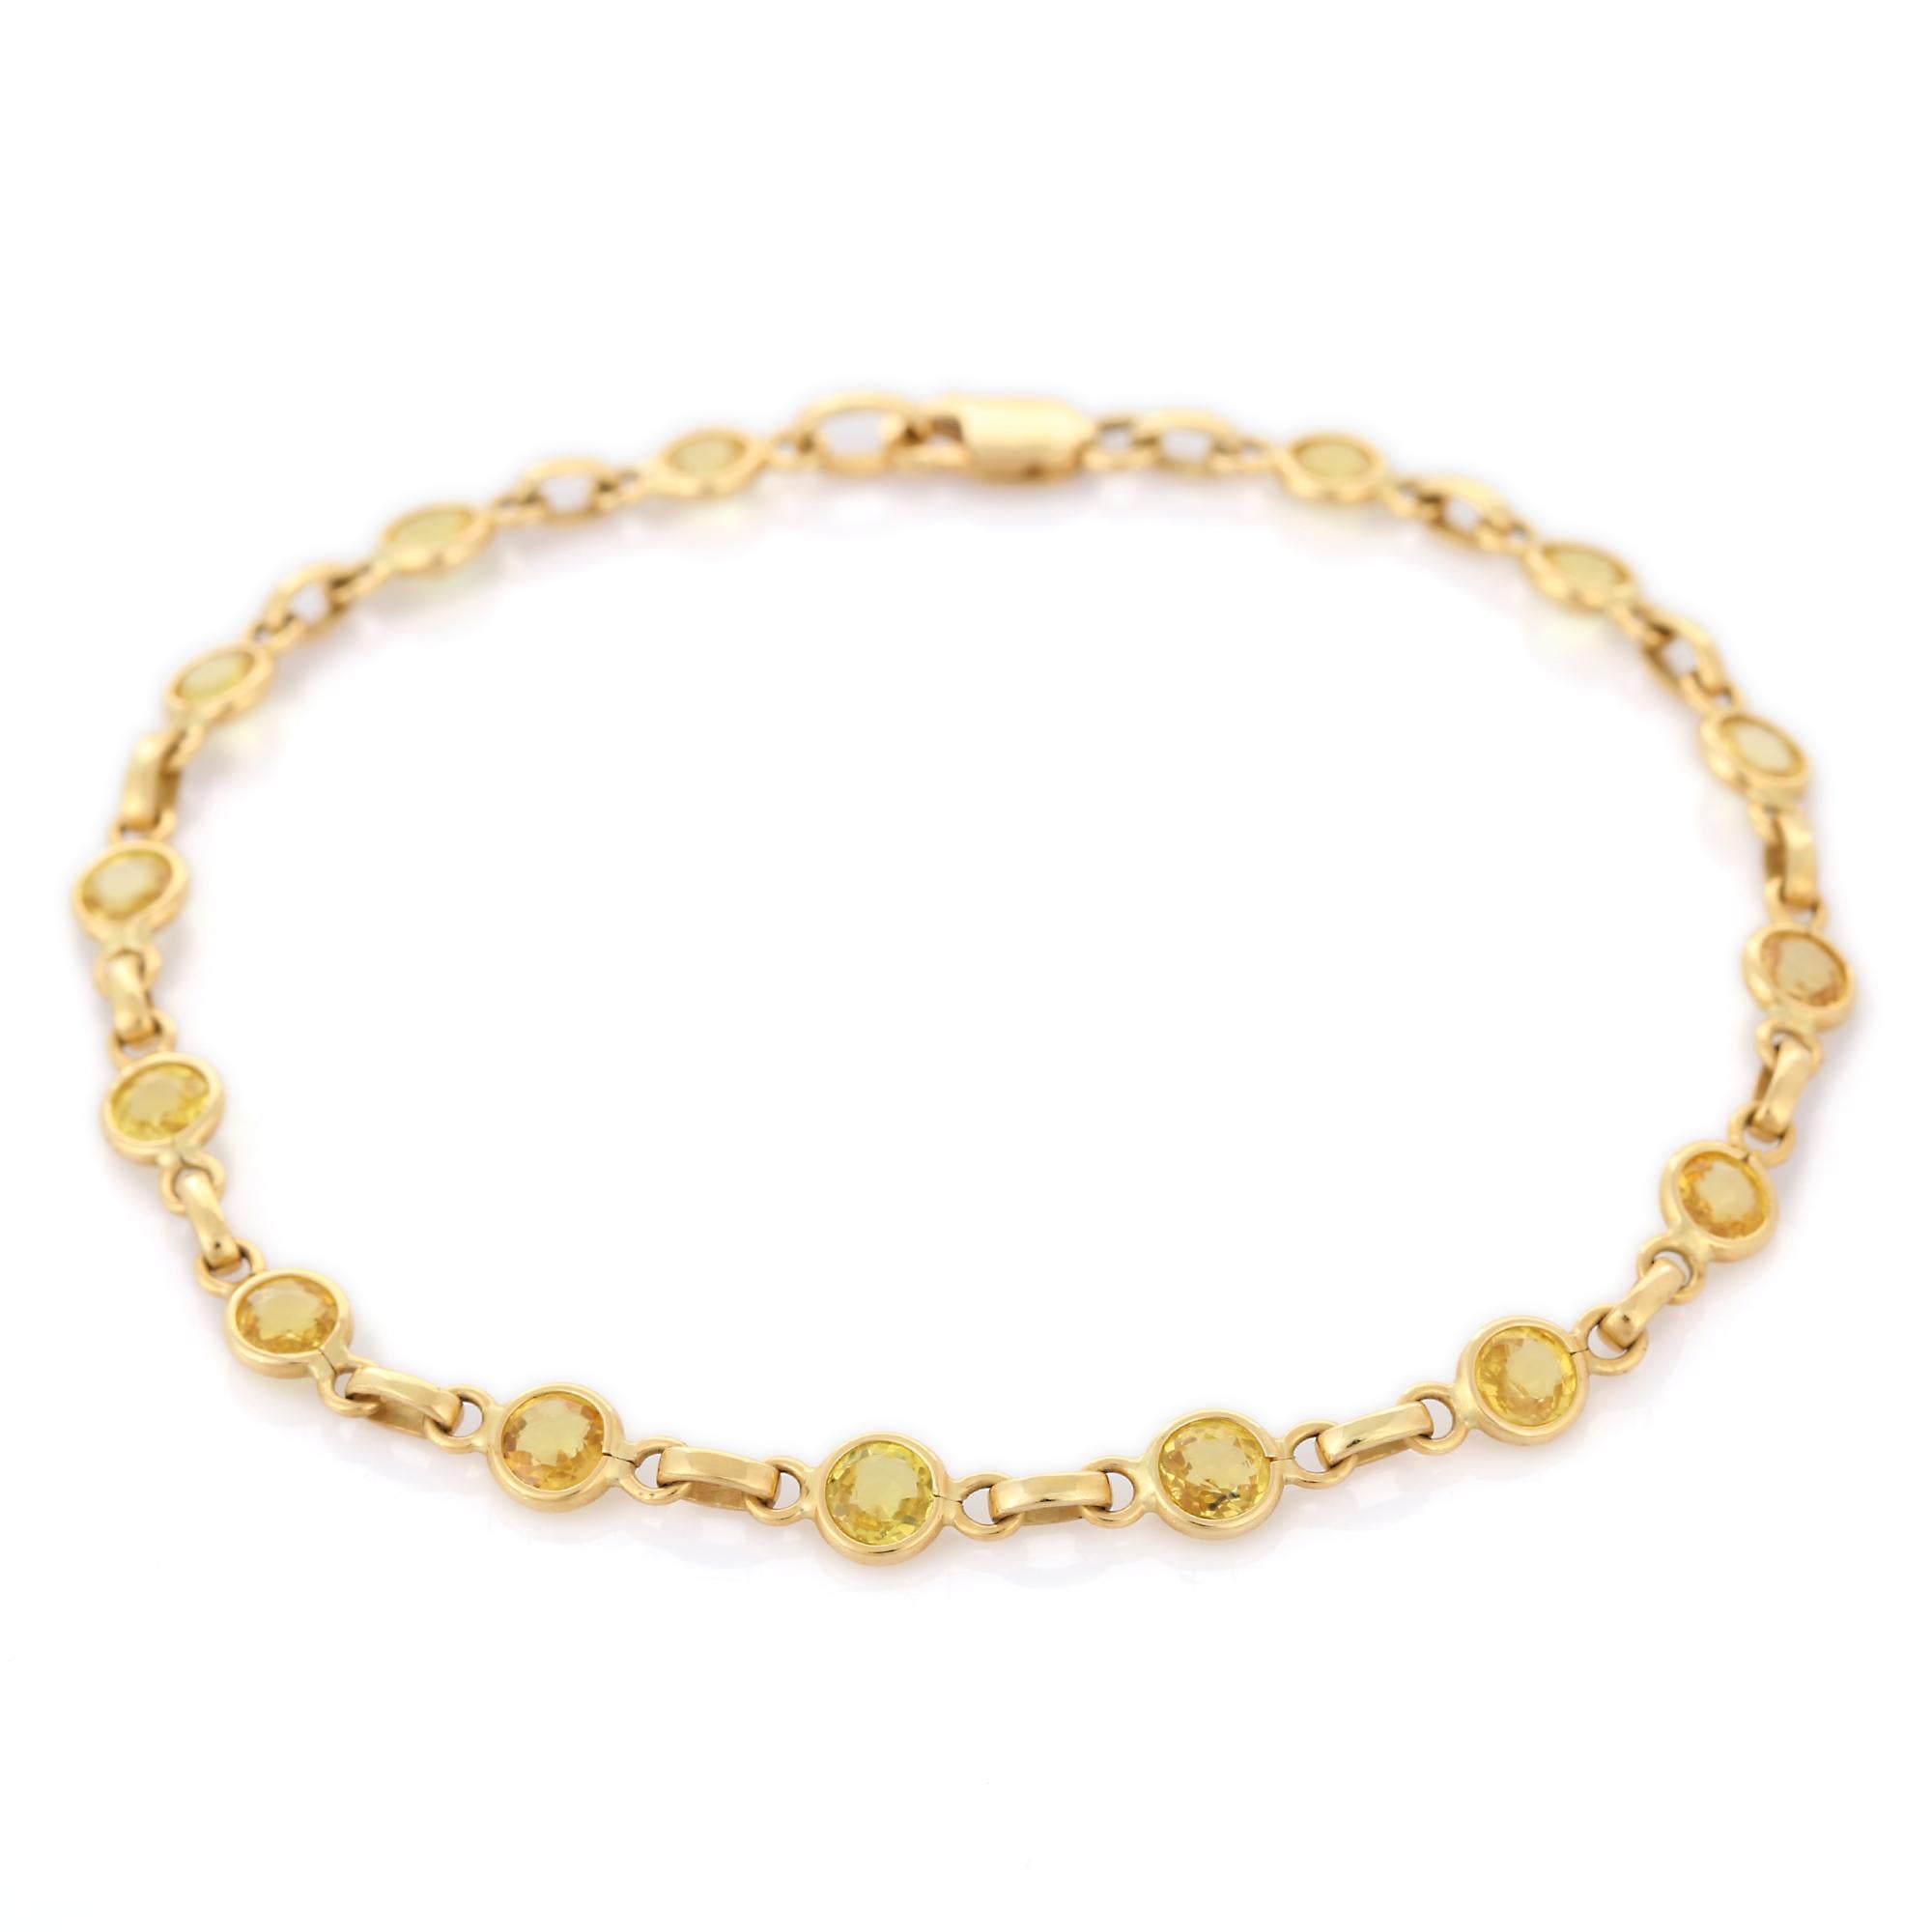 Women's Alluring 4.14 Ct Round Cut Yellow Sapphire Chain Bracelet in 18K Yellow Gold For Sale